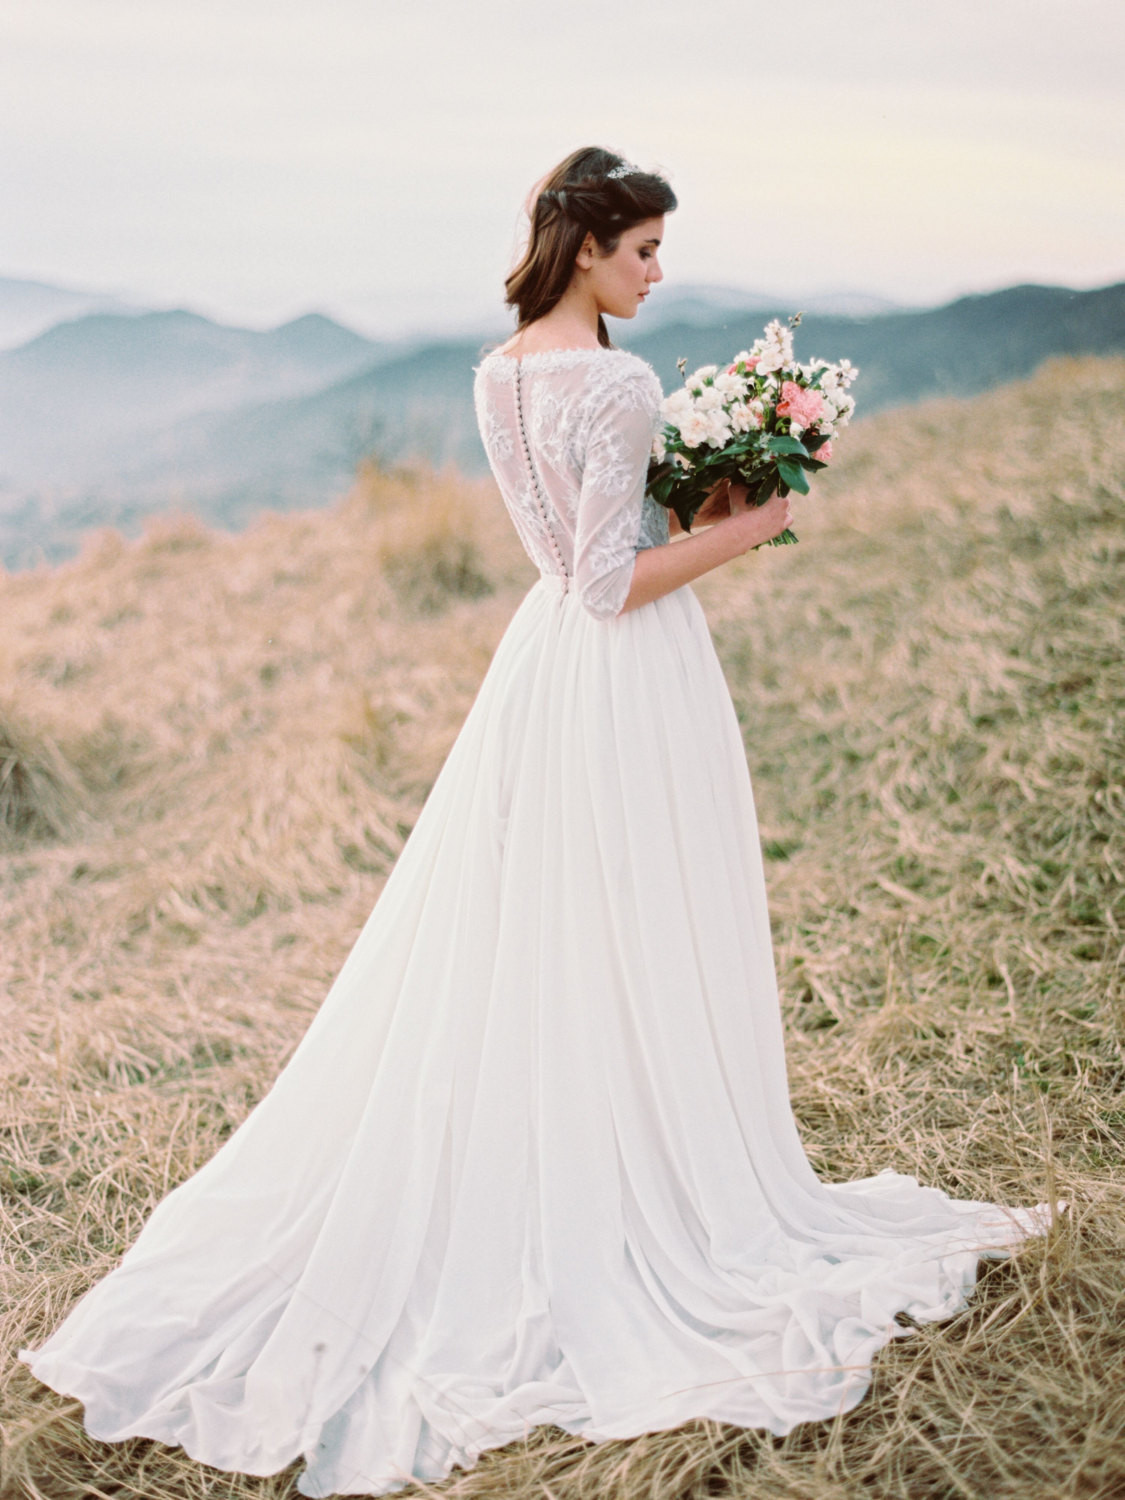 Ethereal Wedding Gowns
 20 Ethereal Wedding Dresses from Etsy